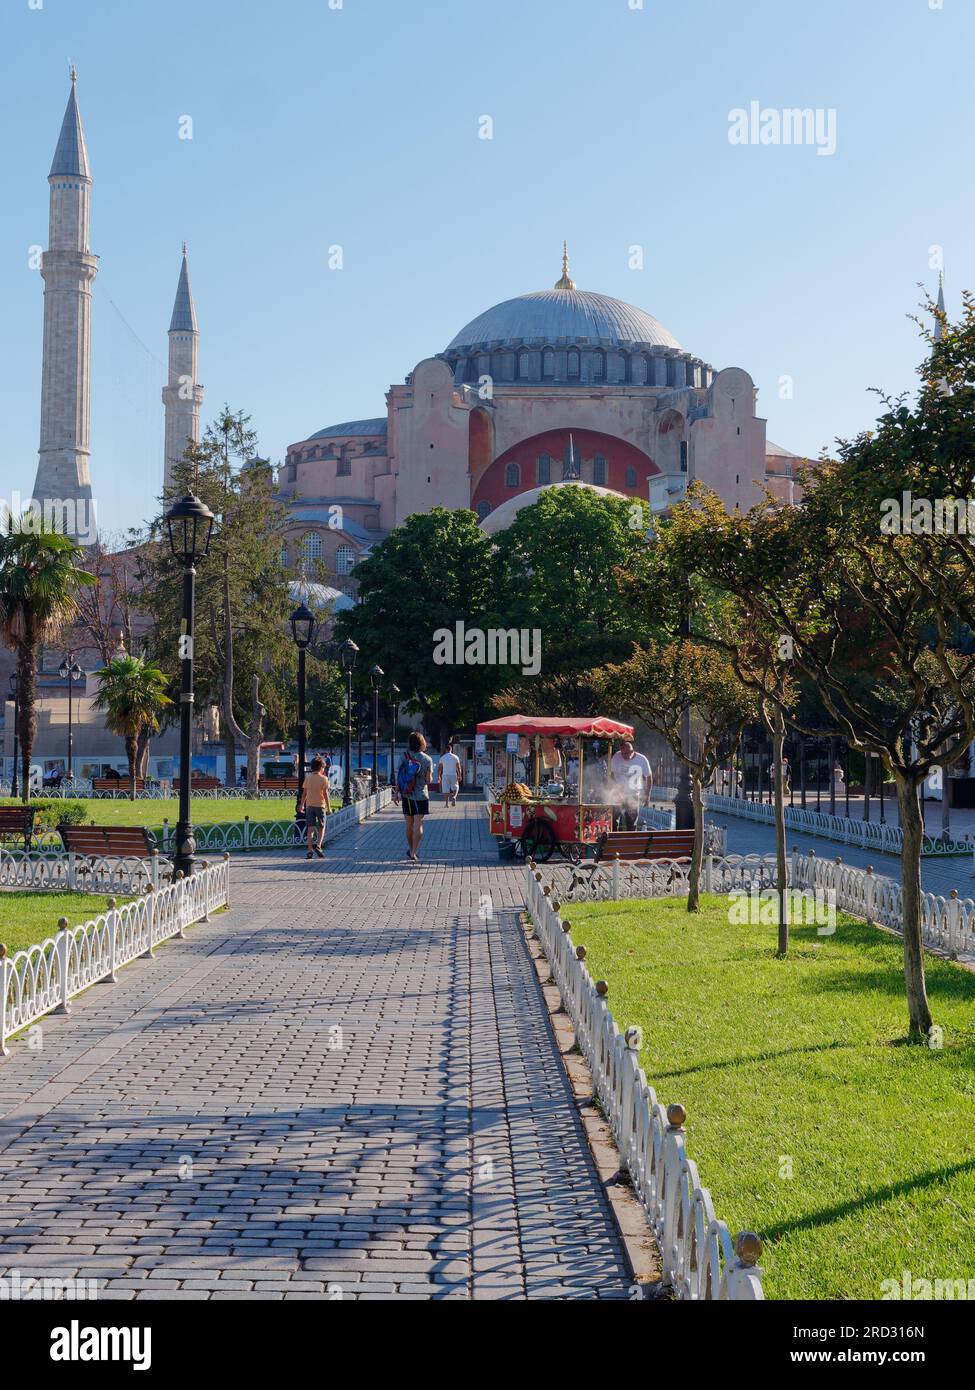 Gardens of Sultanahmet Park with the Hagia Sophia Mosque. Red vending cart sells roasted corn. Istanbul, Turkey Stock Photo